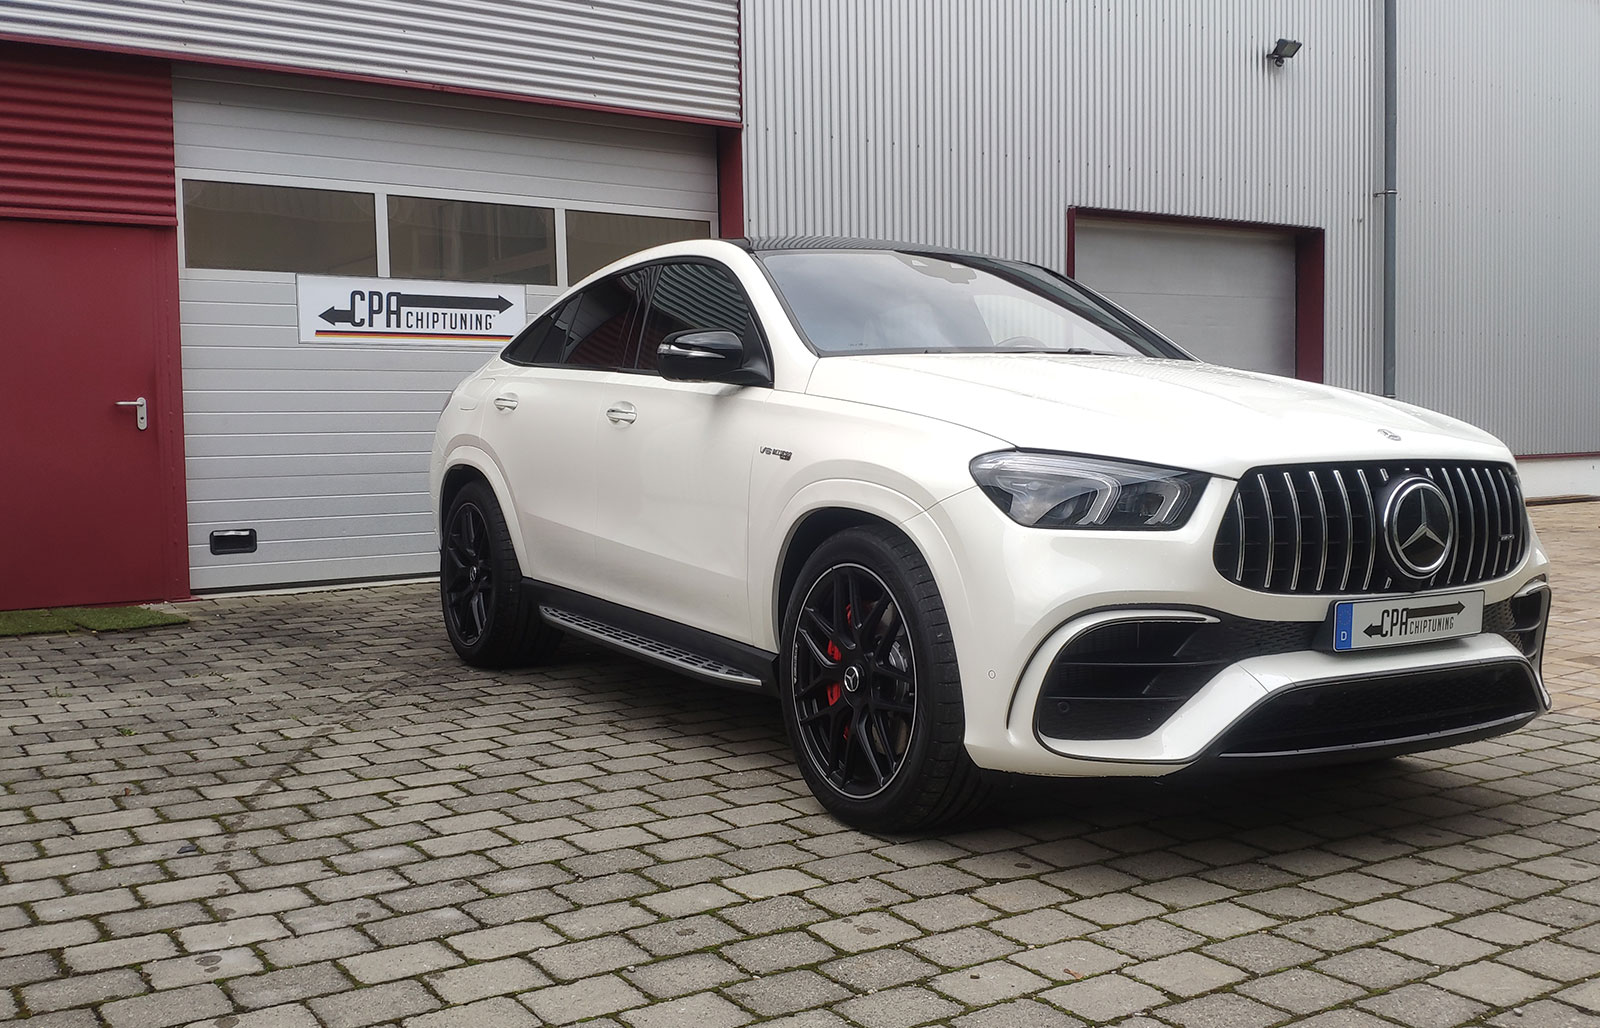 Mercedes GLE-Class (C167) GLE63 S AMG 4MATIC+ Coupe Chiptuning